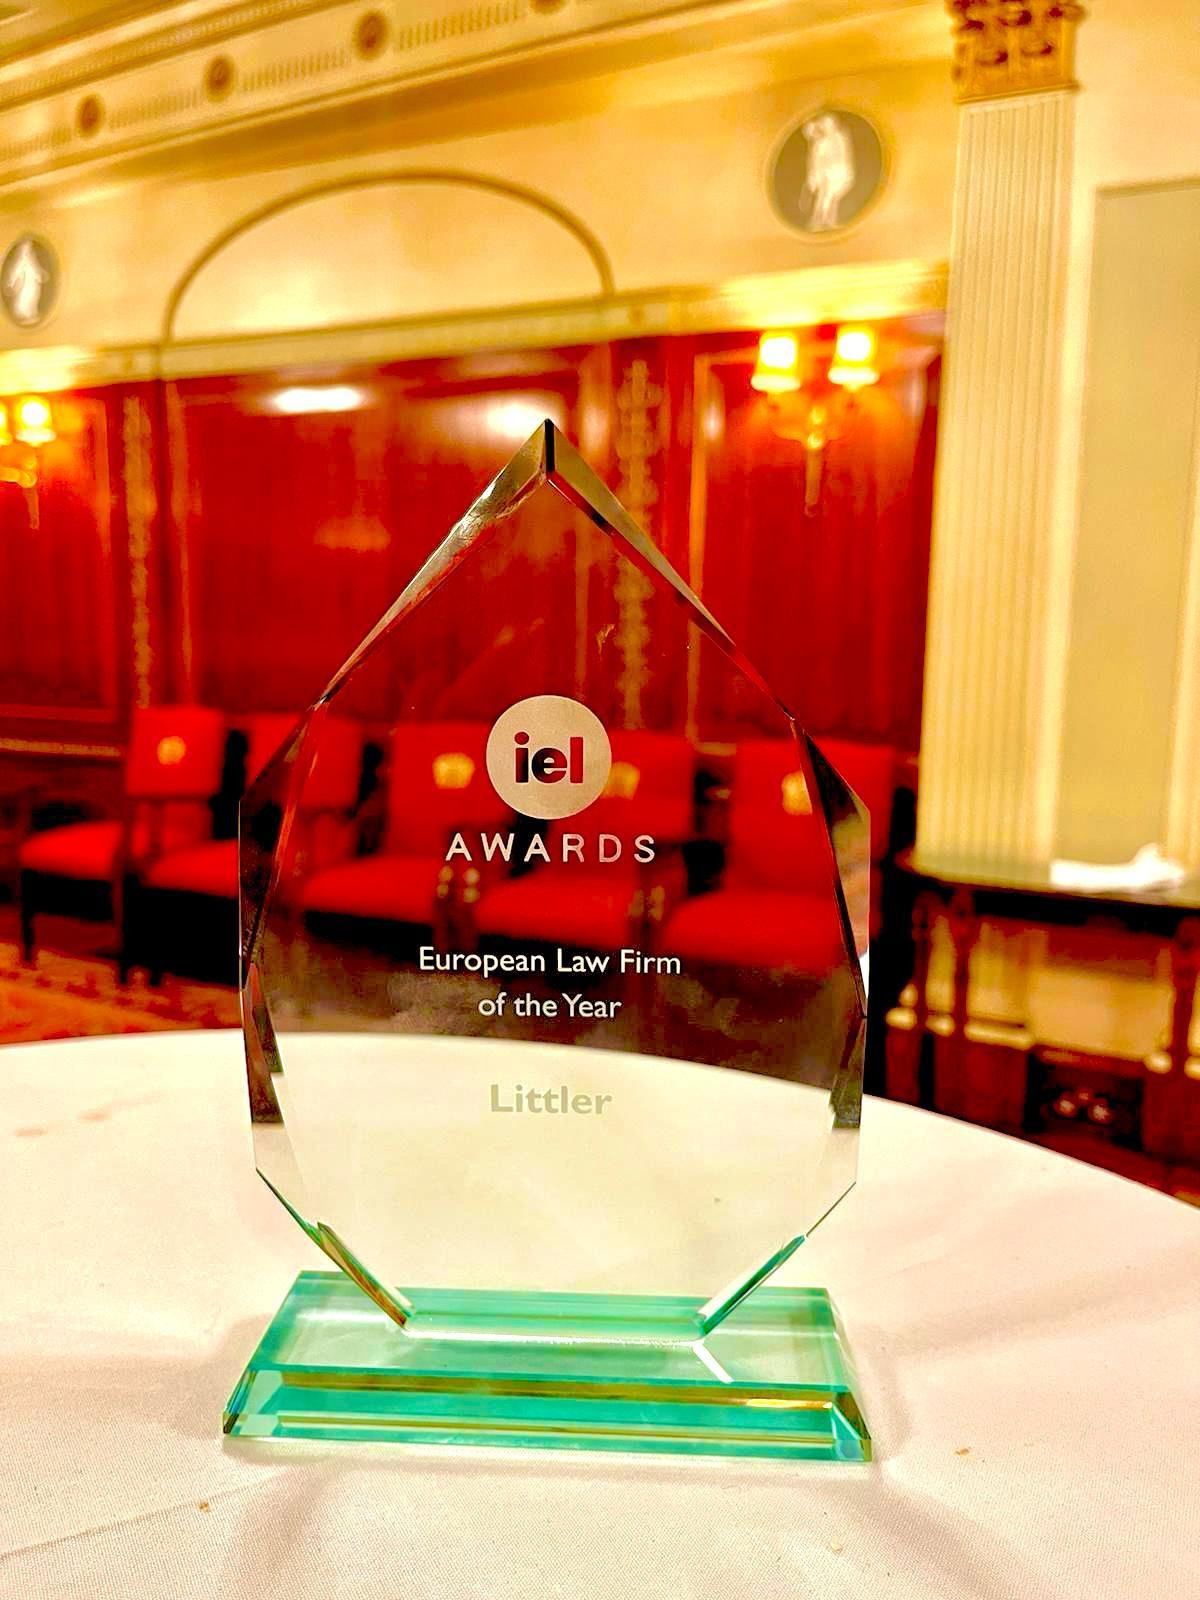 And the winner is: Littler - European Law Firm of the Year